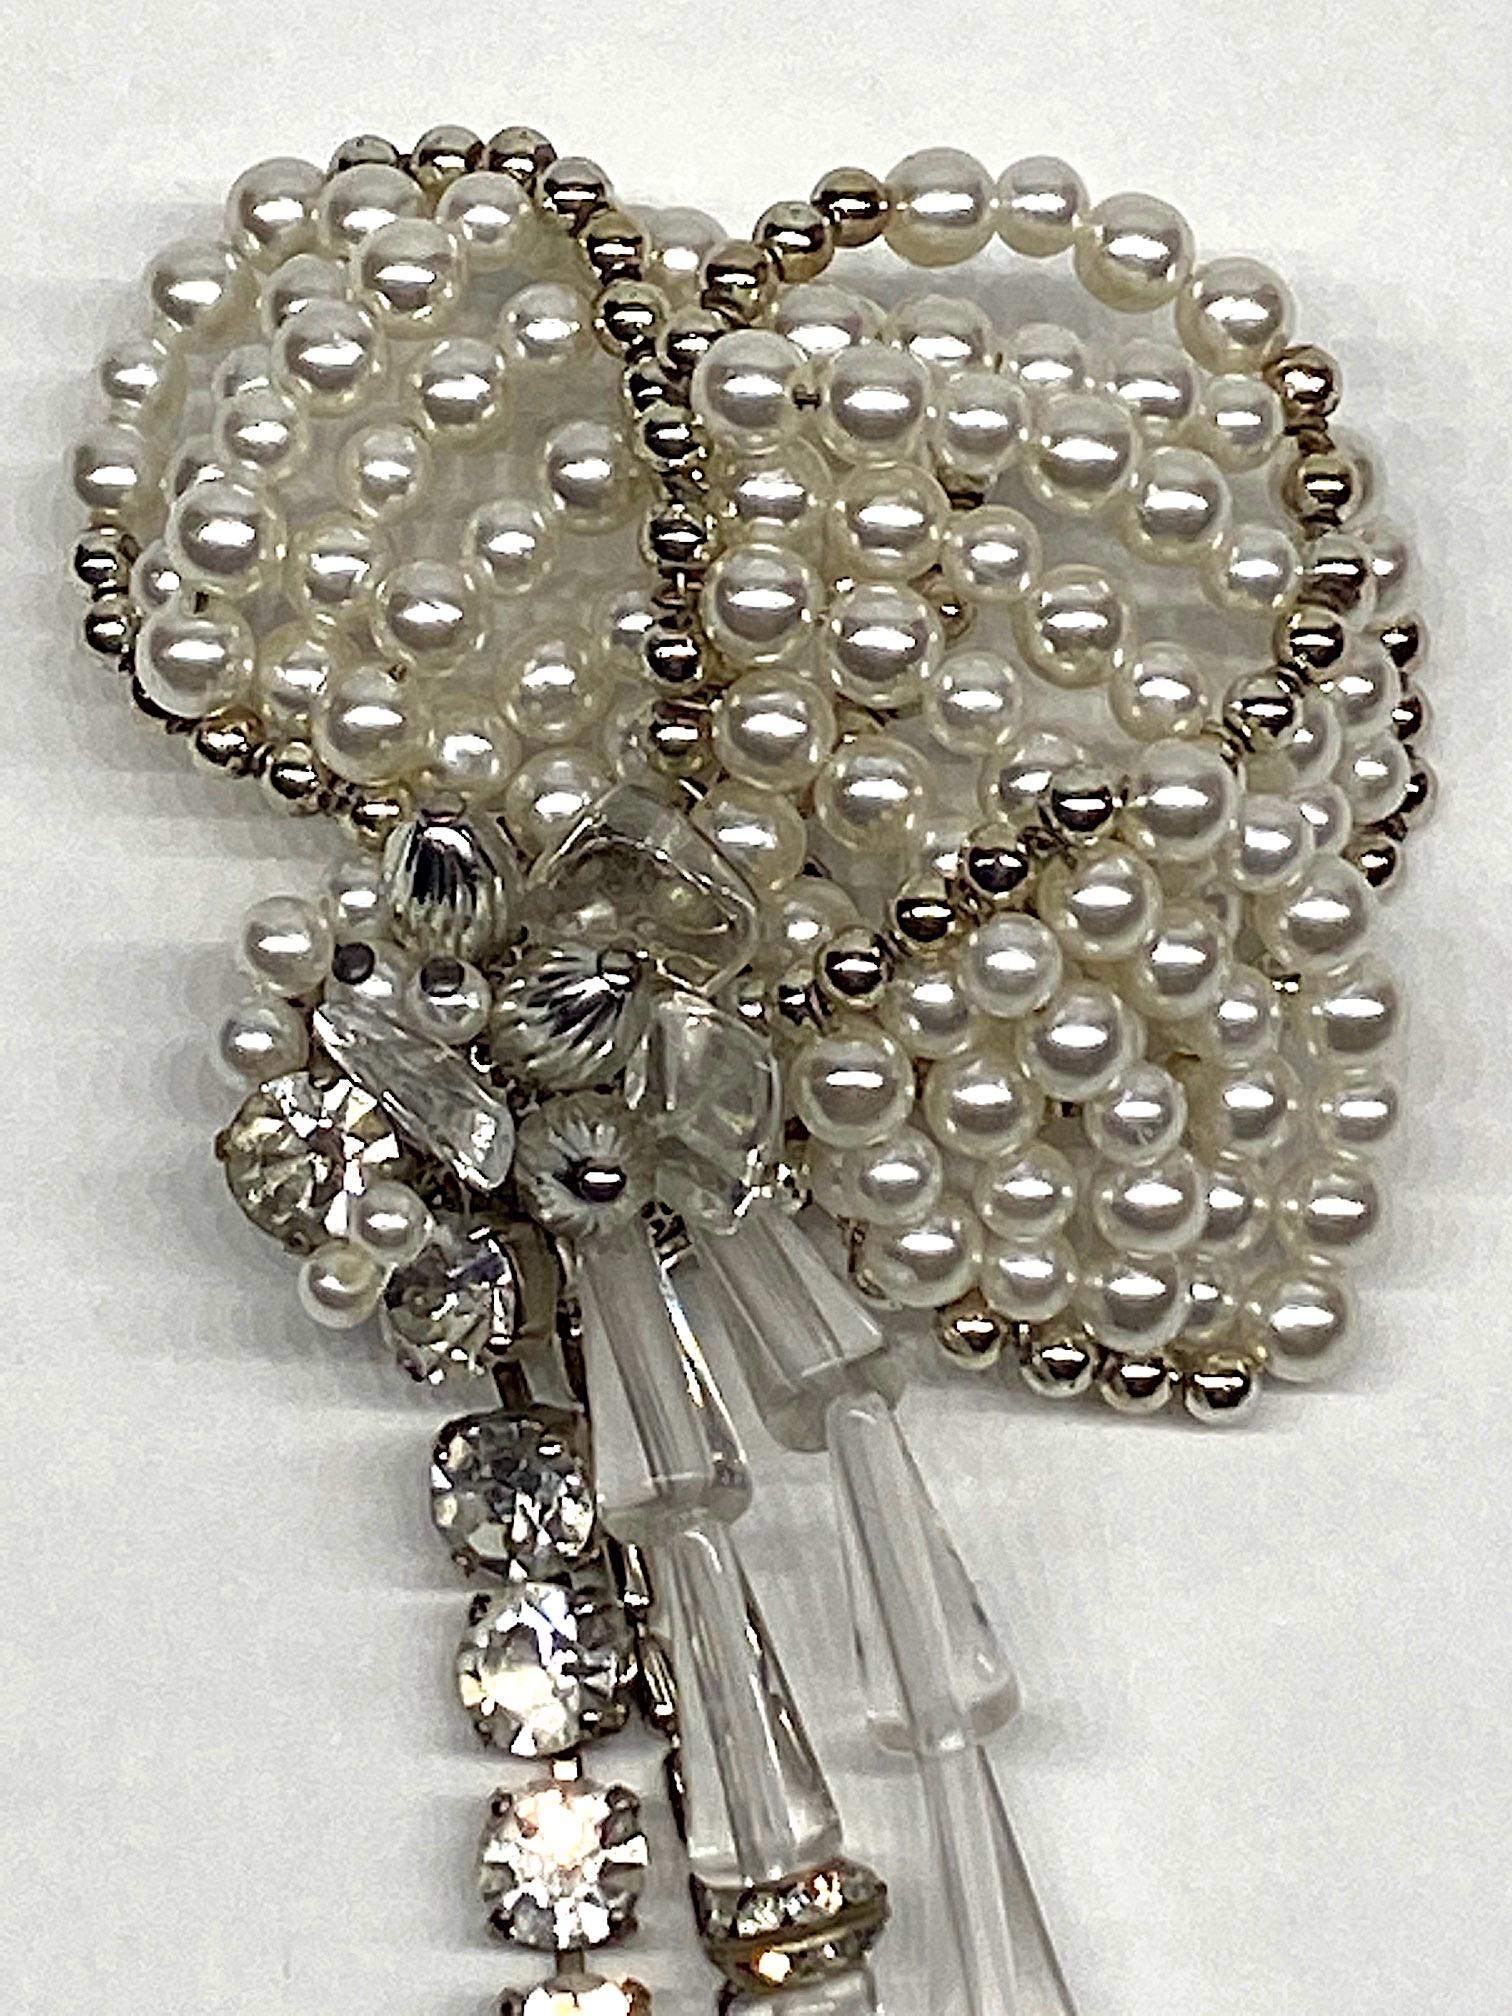 A truly stunning and large three dimensional flower brooch by fashion jewelry designer Sharra Pagano of Milan, Italy. The petals of the flower are hand strung faux pearls and rhodium plate silver beads that over lap each other. They are attached to